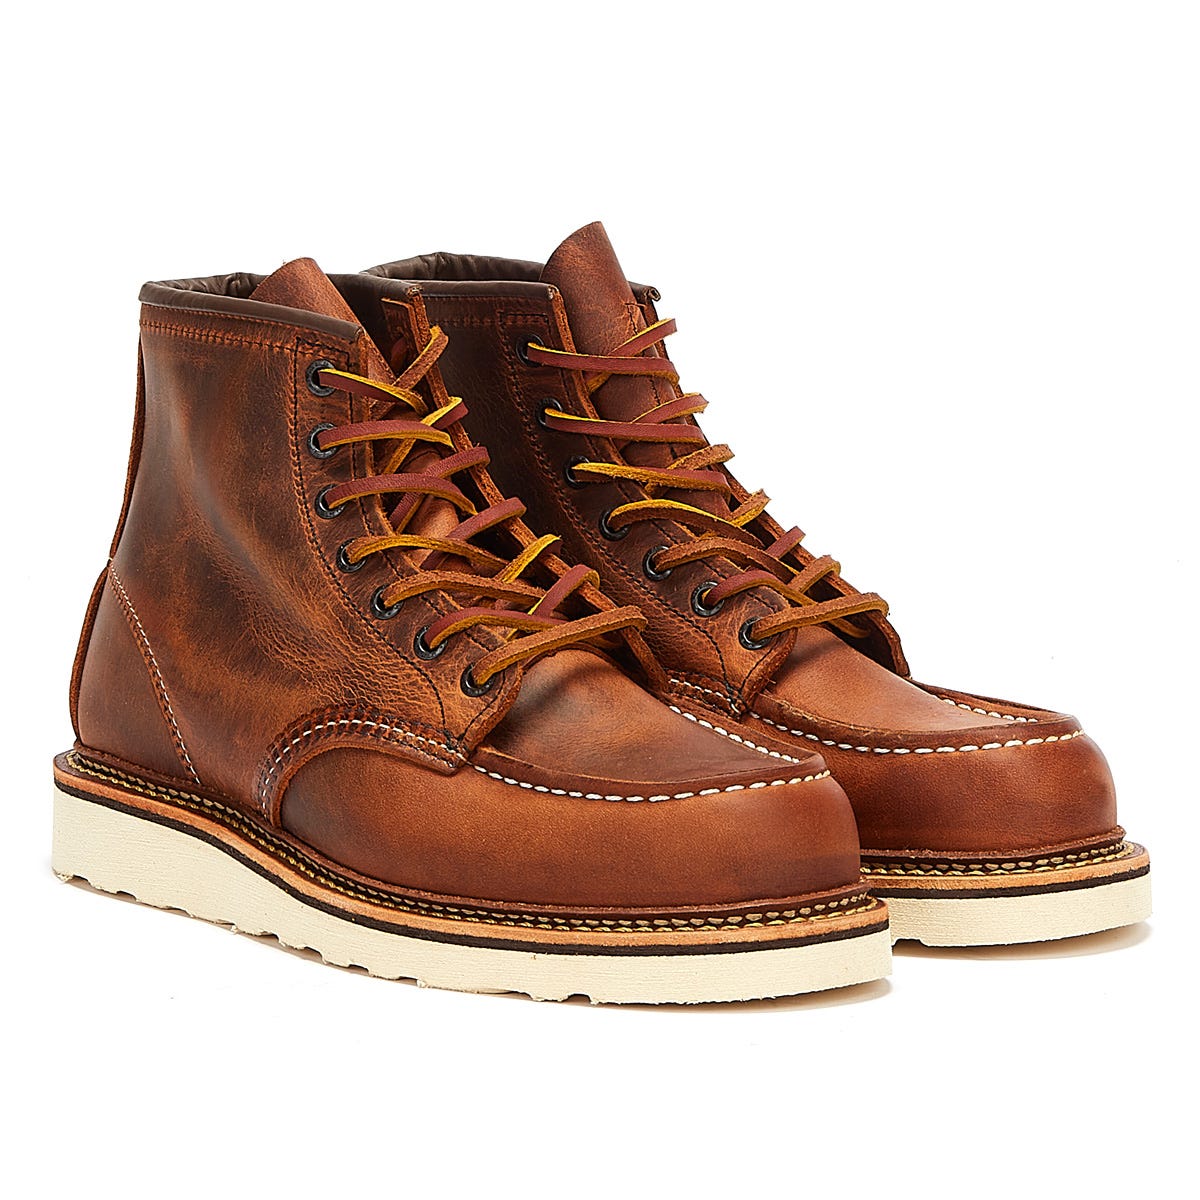 red wing shoes classic moc toe r&t mens copper stiefel brown